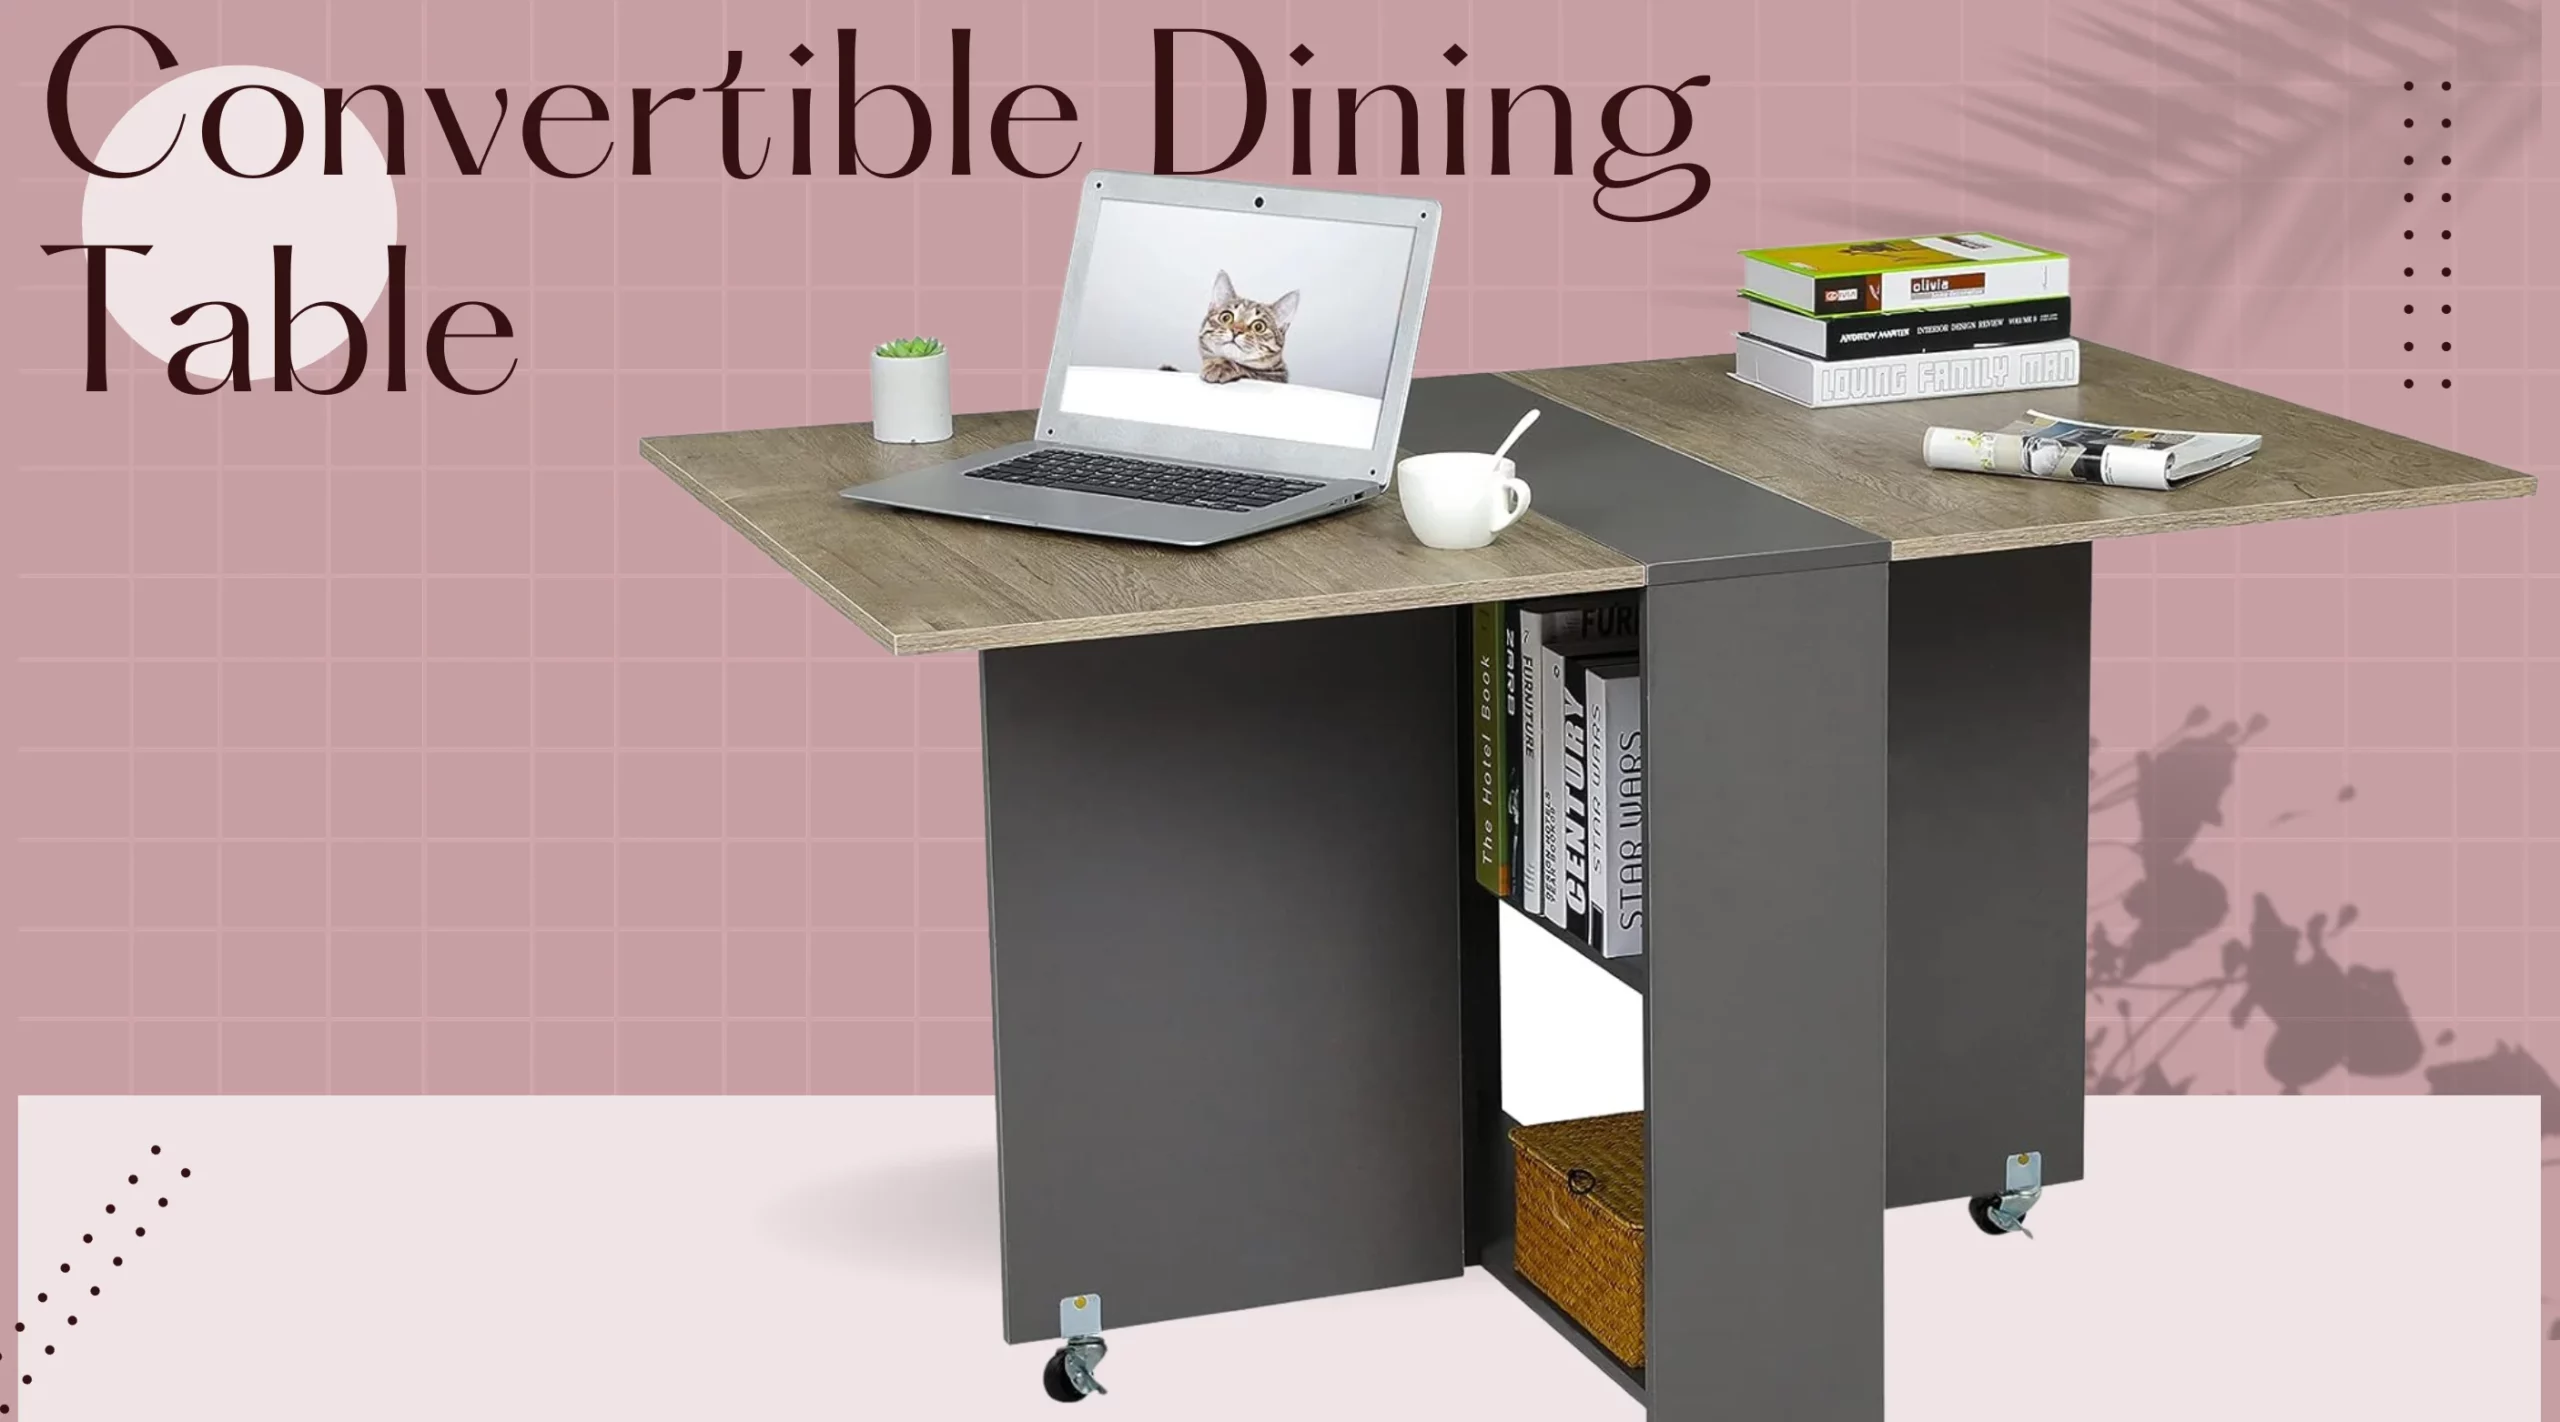 Convertible Dining Table